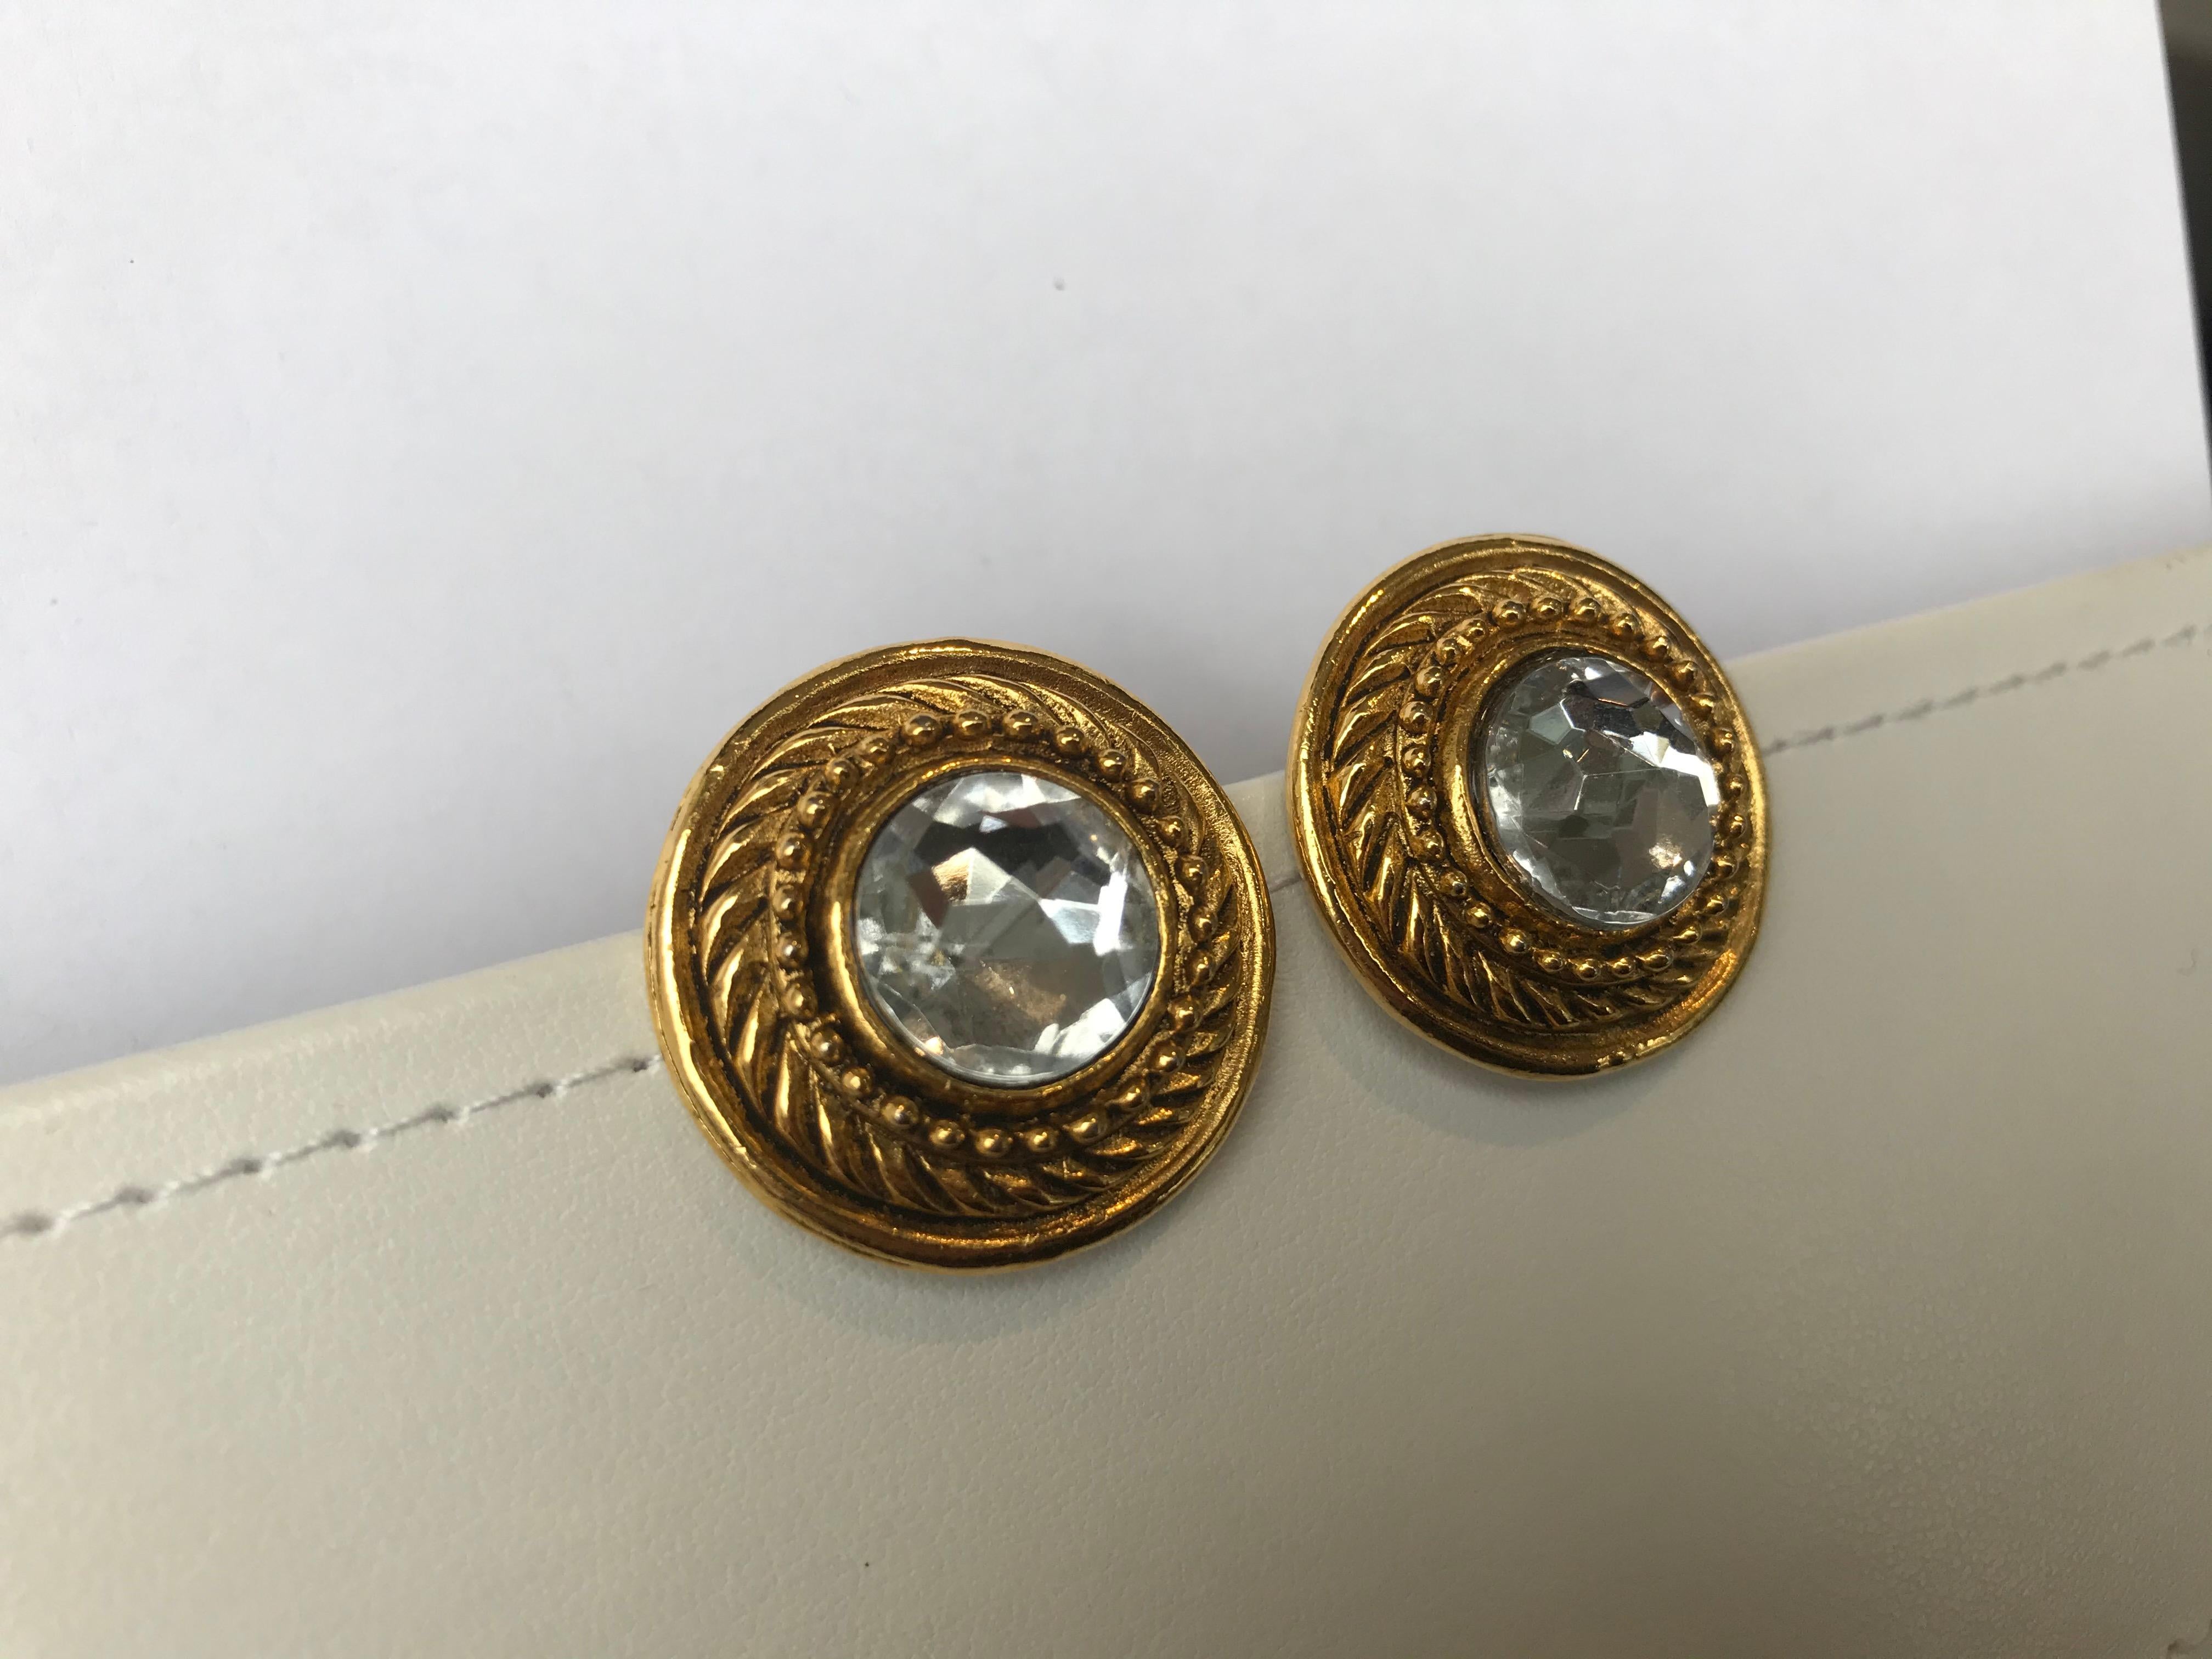 Chanel Vintage Crystal Clip-On Earrings In Good Condition For Sale In Roslyn, NY